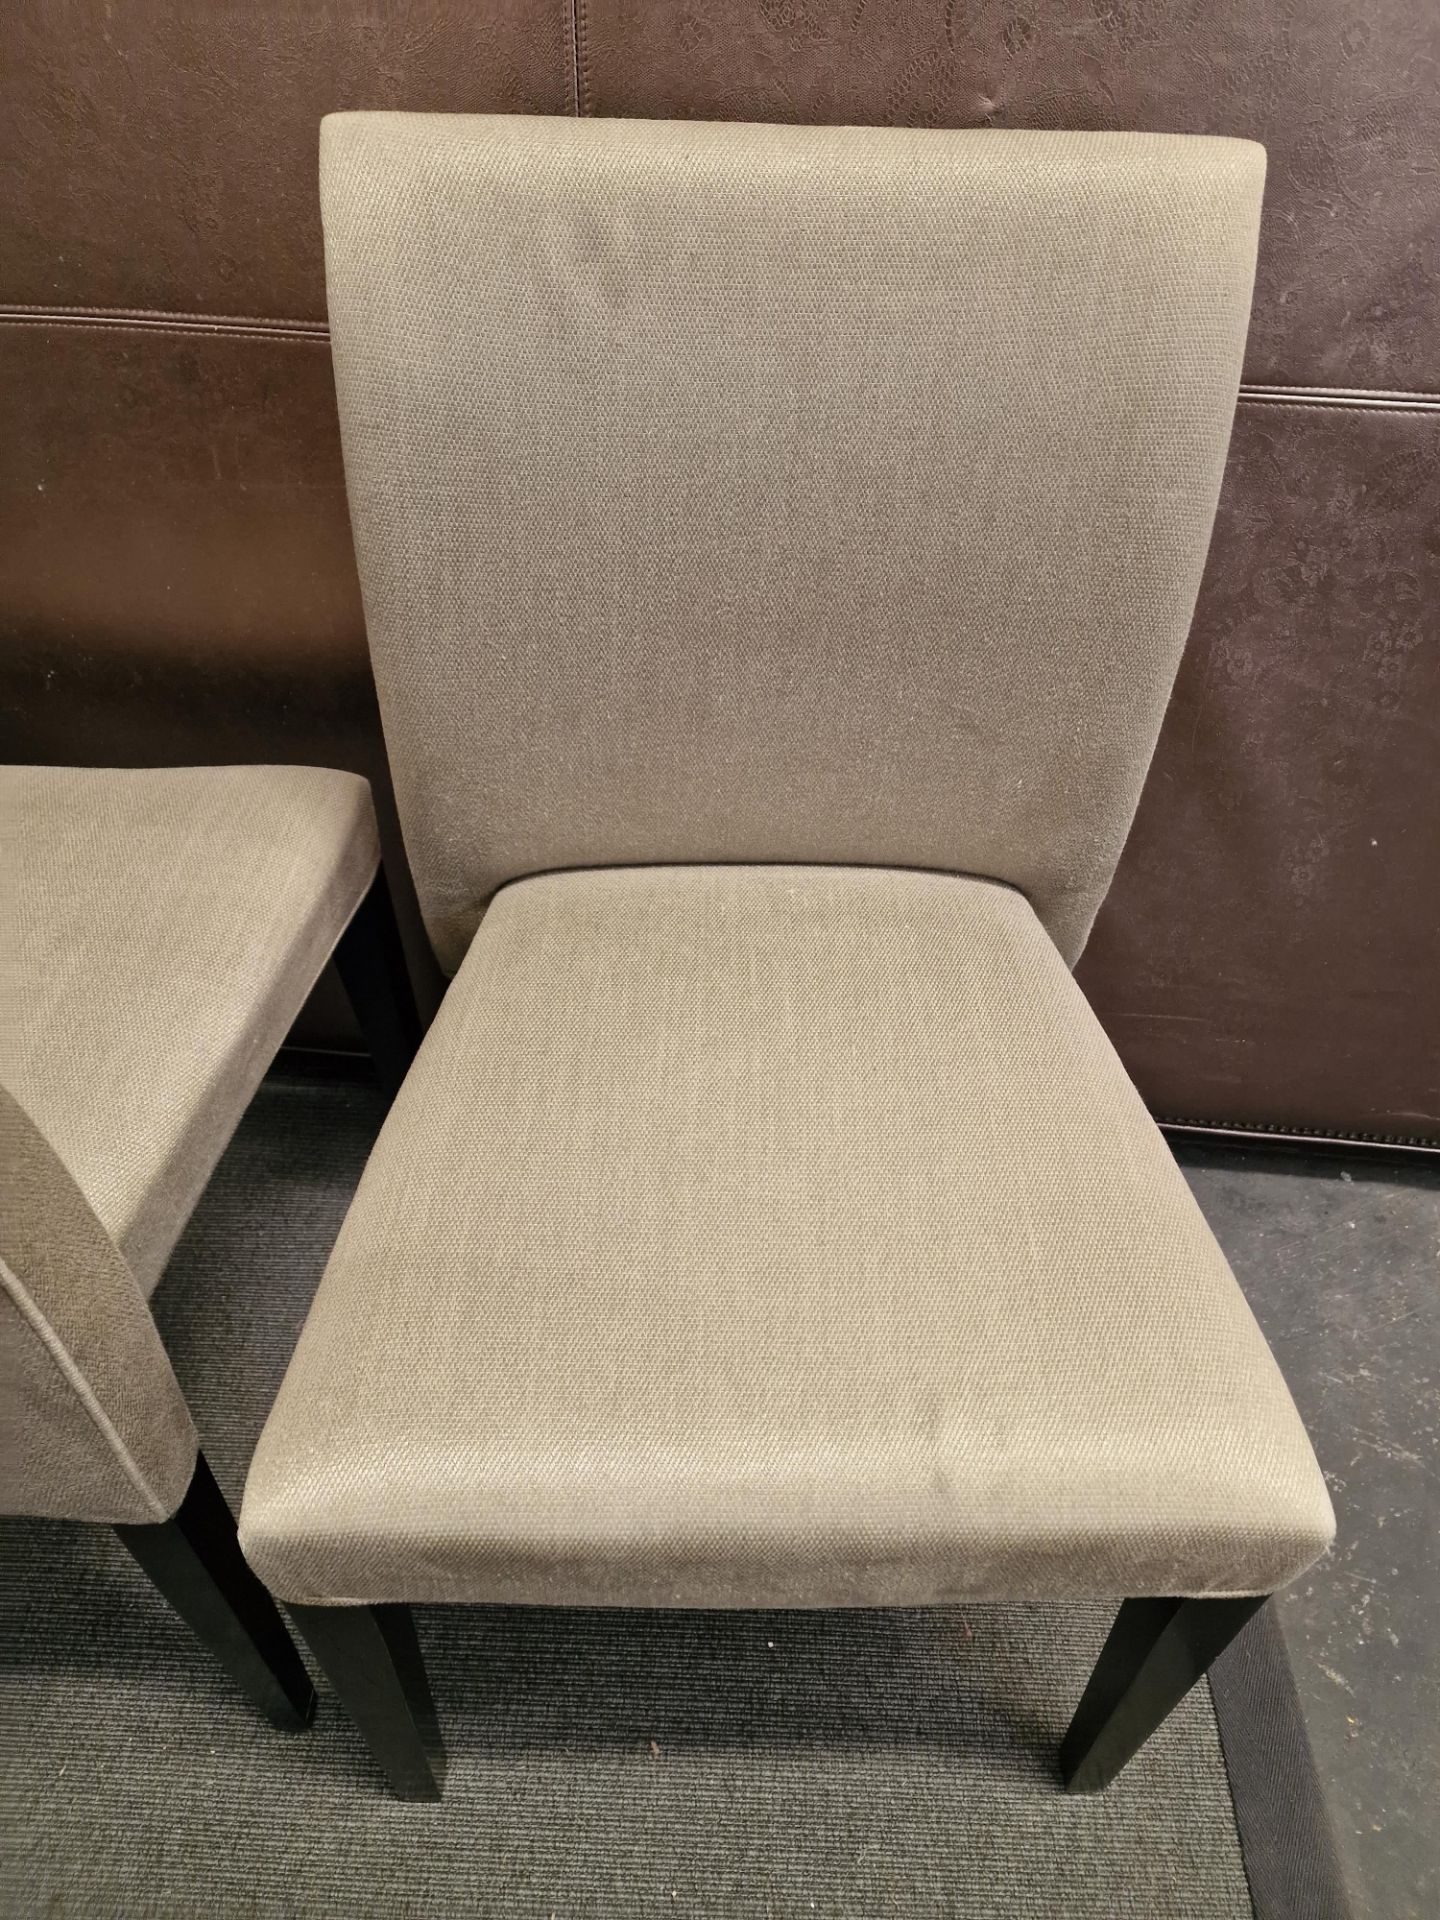 4 x Beige Fabric Dinning Chairs With Dark Wooden Legs 48cm x 43cm x 88cm High - Image 3 of 3